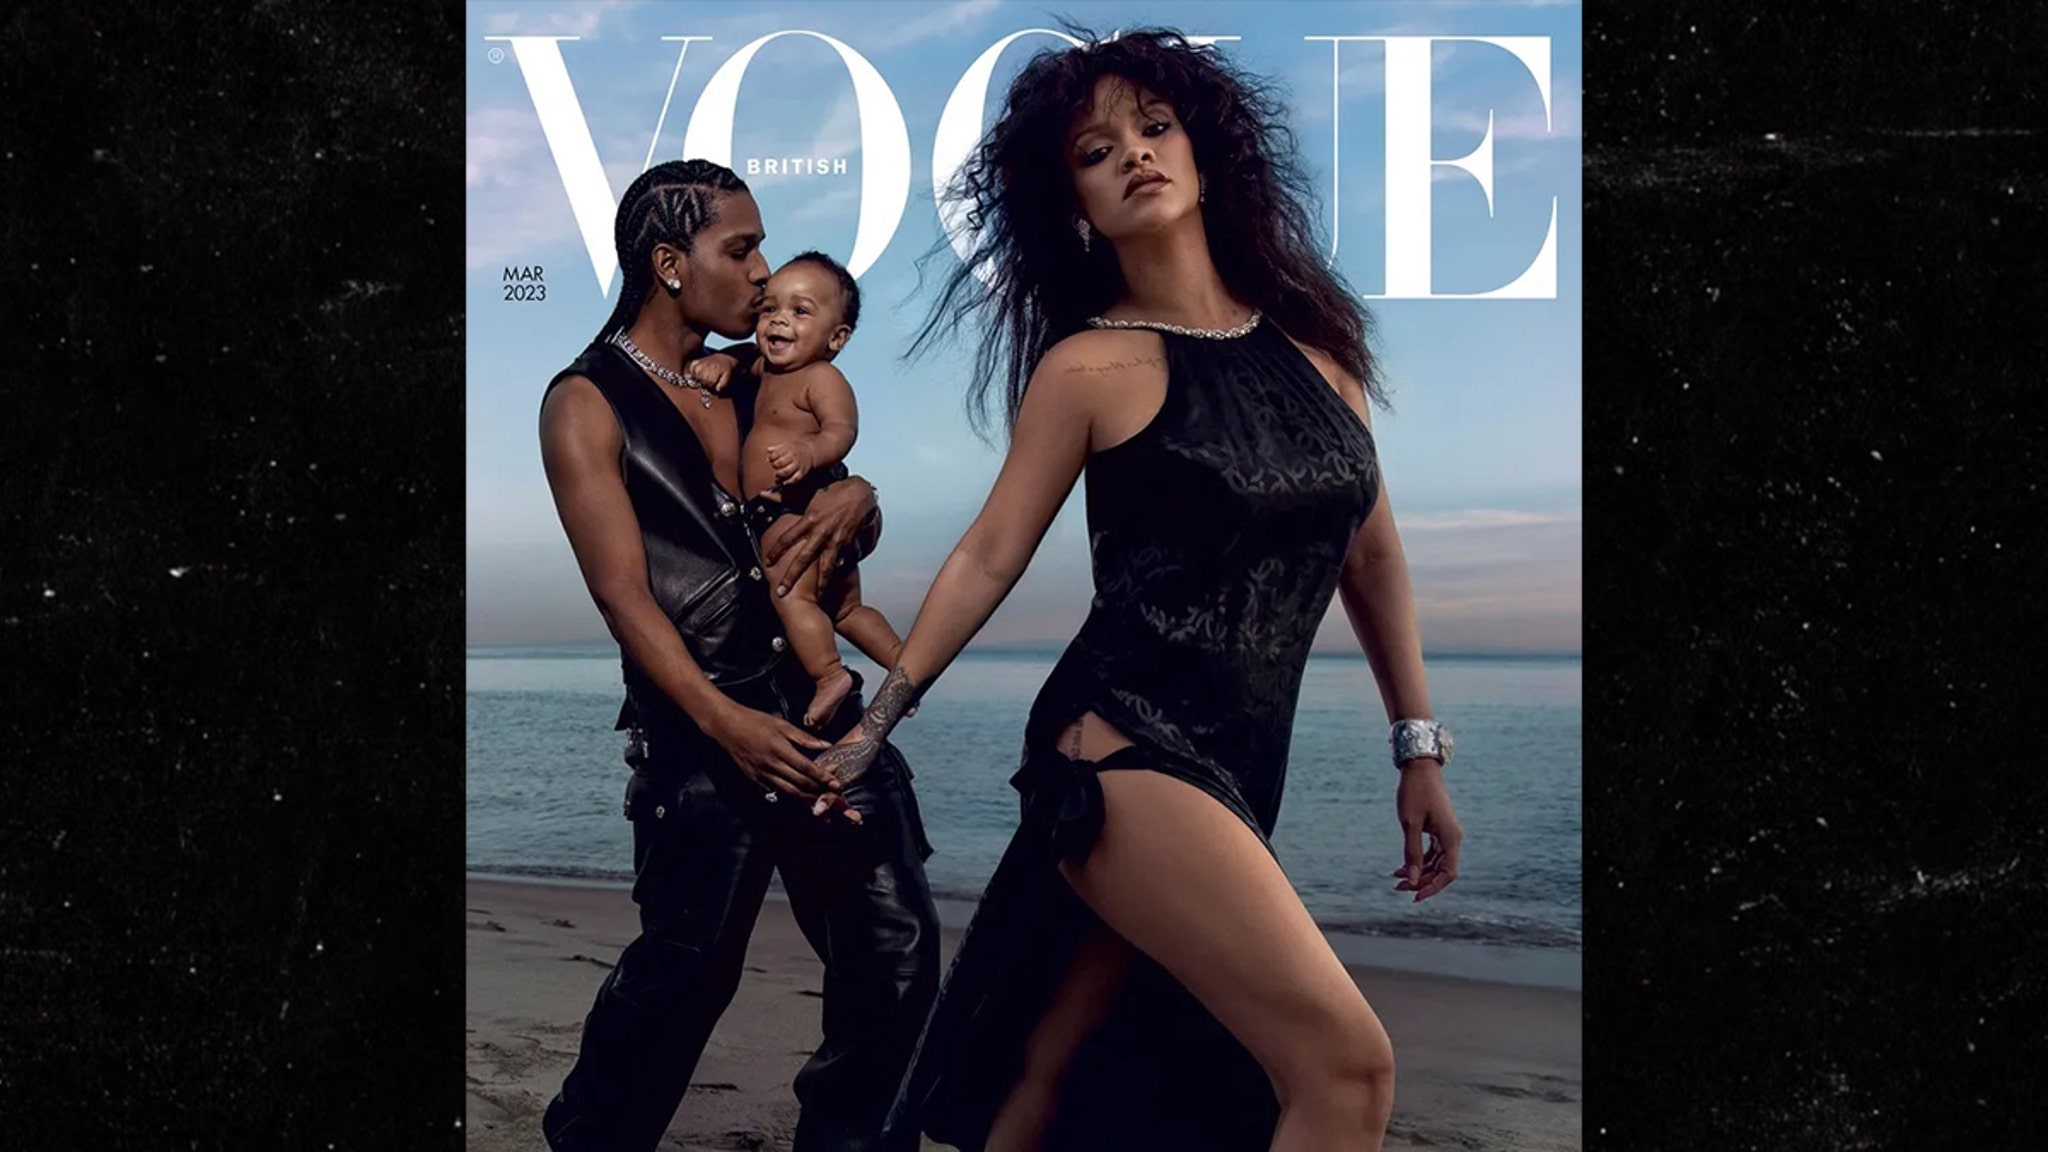 Rihanna reveals she was pregnant during the British Vogue shoot, but didn’t know it